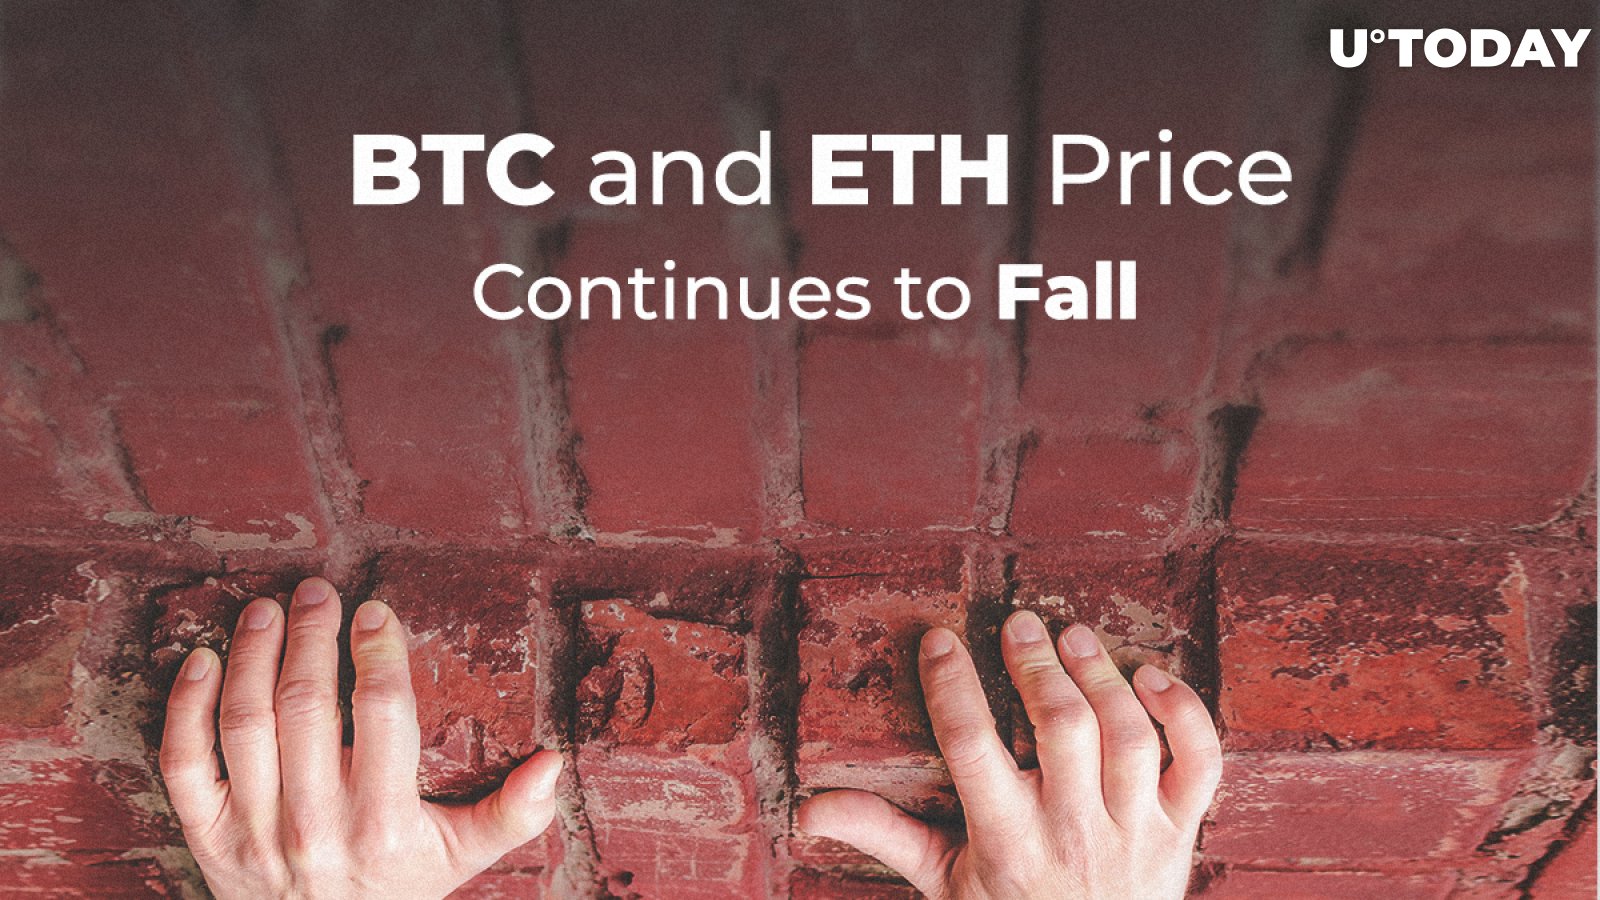 Bitcoin and Ethereum Prices Continue to Fall as Volume Shrinks — Traders Betting on More Losses?